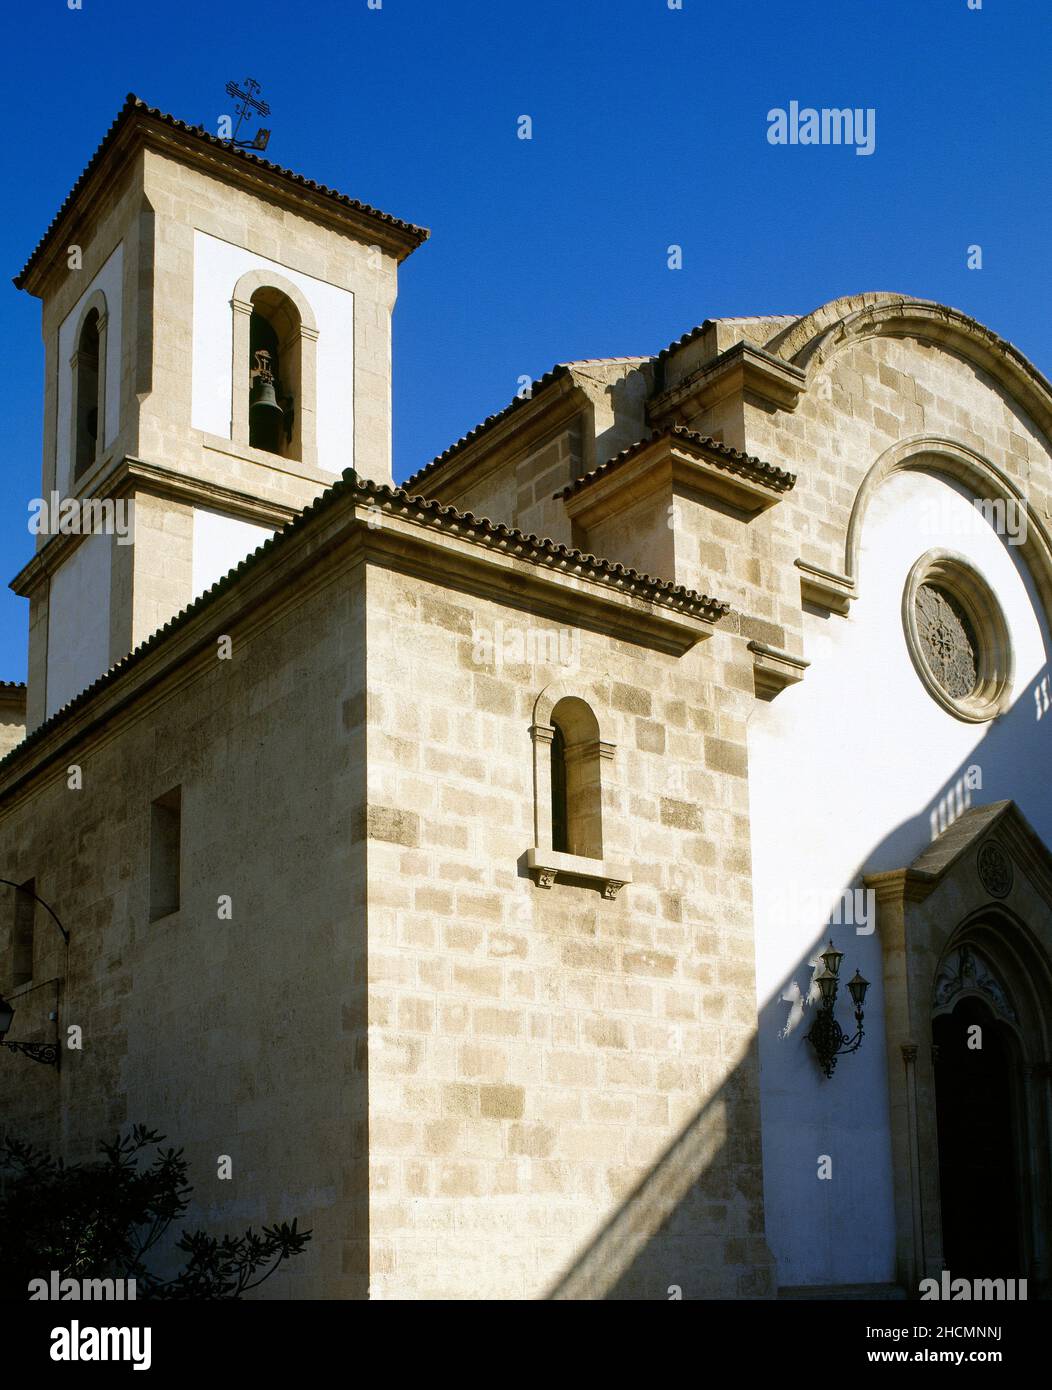 Spain, Andalusia, Almería. Sanctuary of the Virgin of the Sea (Church of Santo Domingo). Main facade. The temple dates from the second quarter of the 16th century. After suffering a fire in 1936, it was restored in 1940 following a project by Guillermo Langle Rubio. The facade was rebuilt by Pedro Bértiz García. Stock Photo